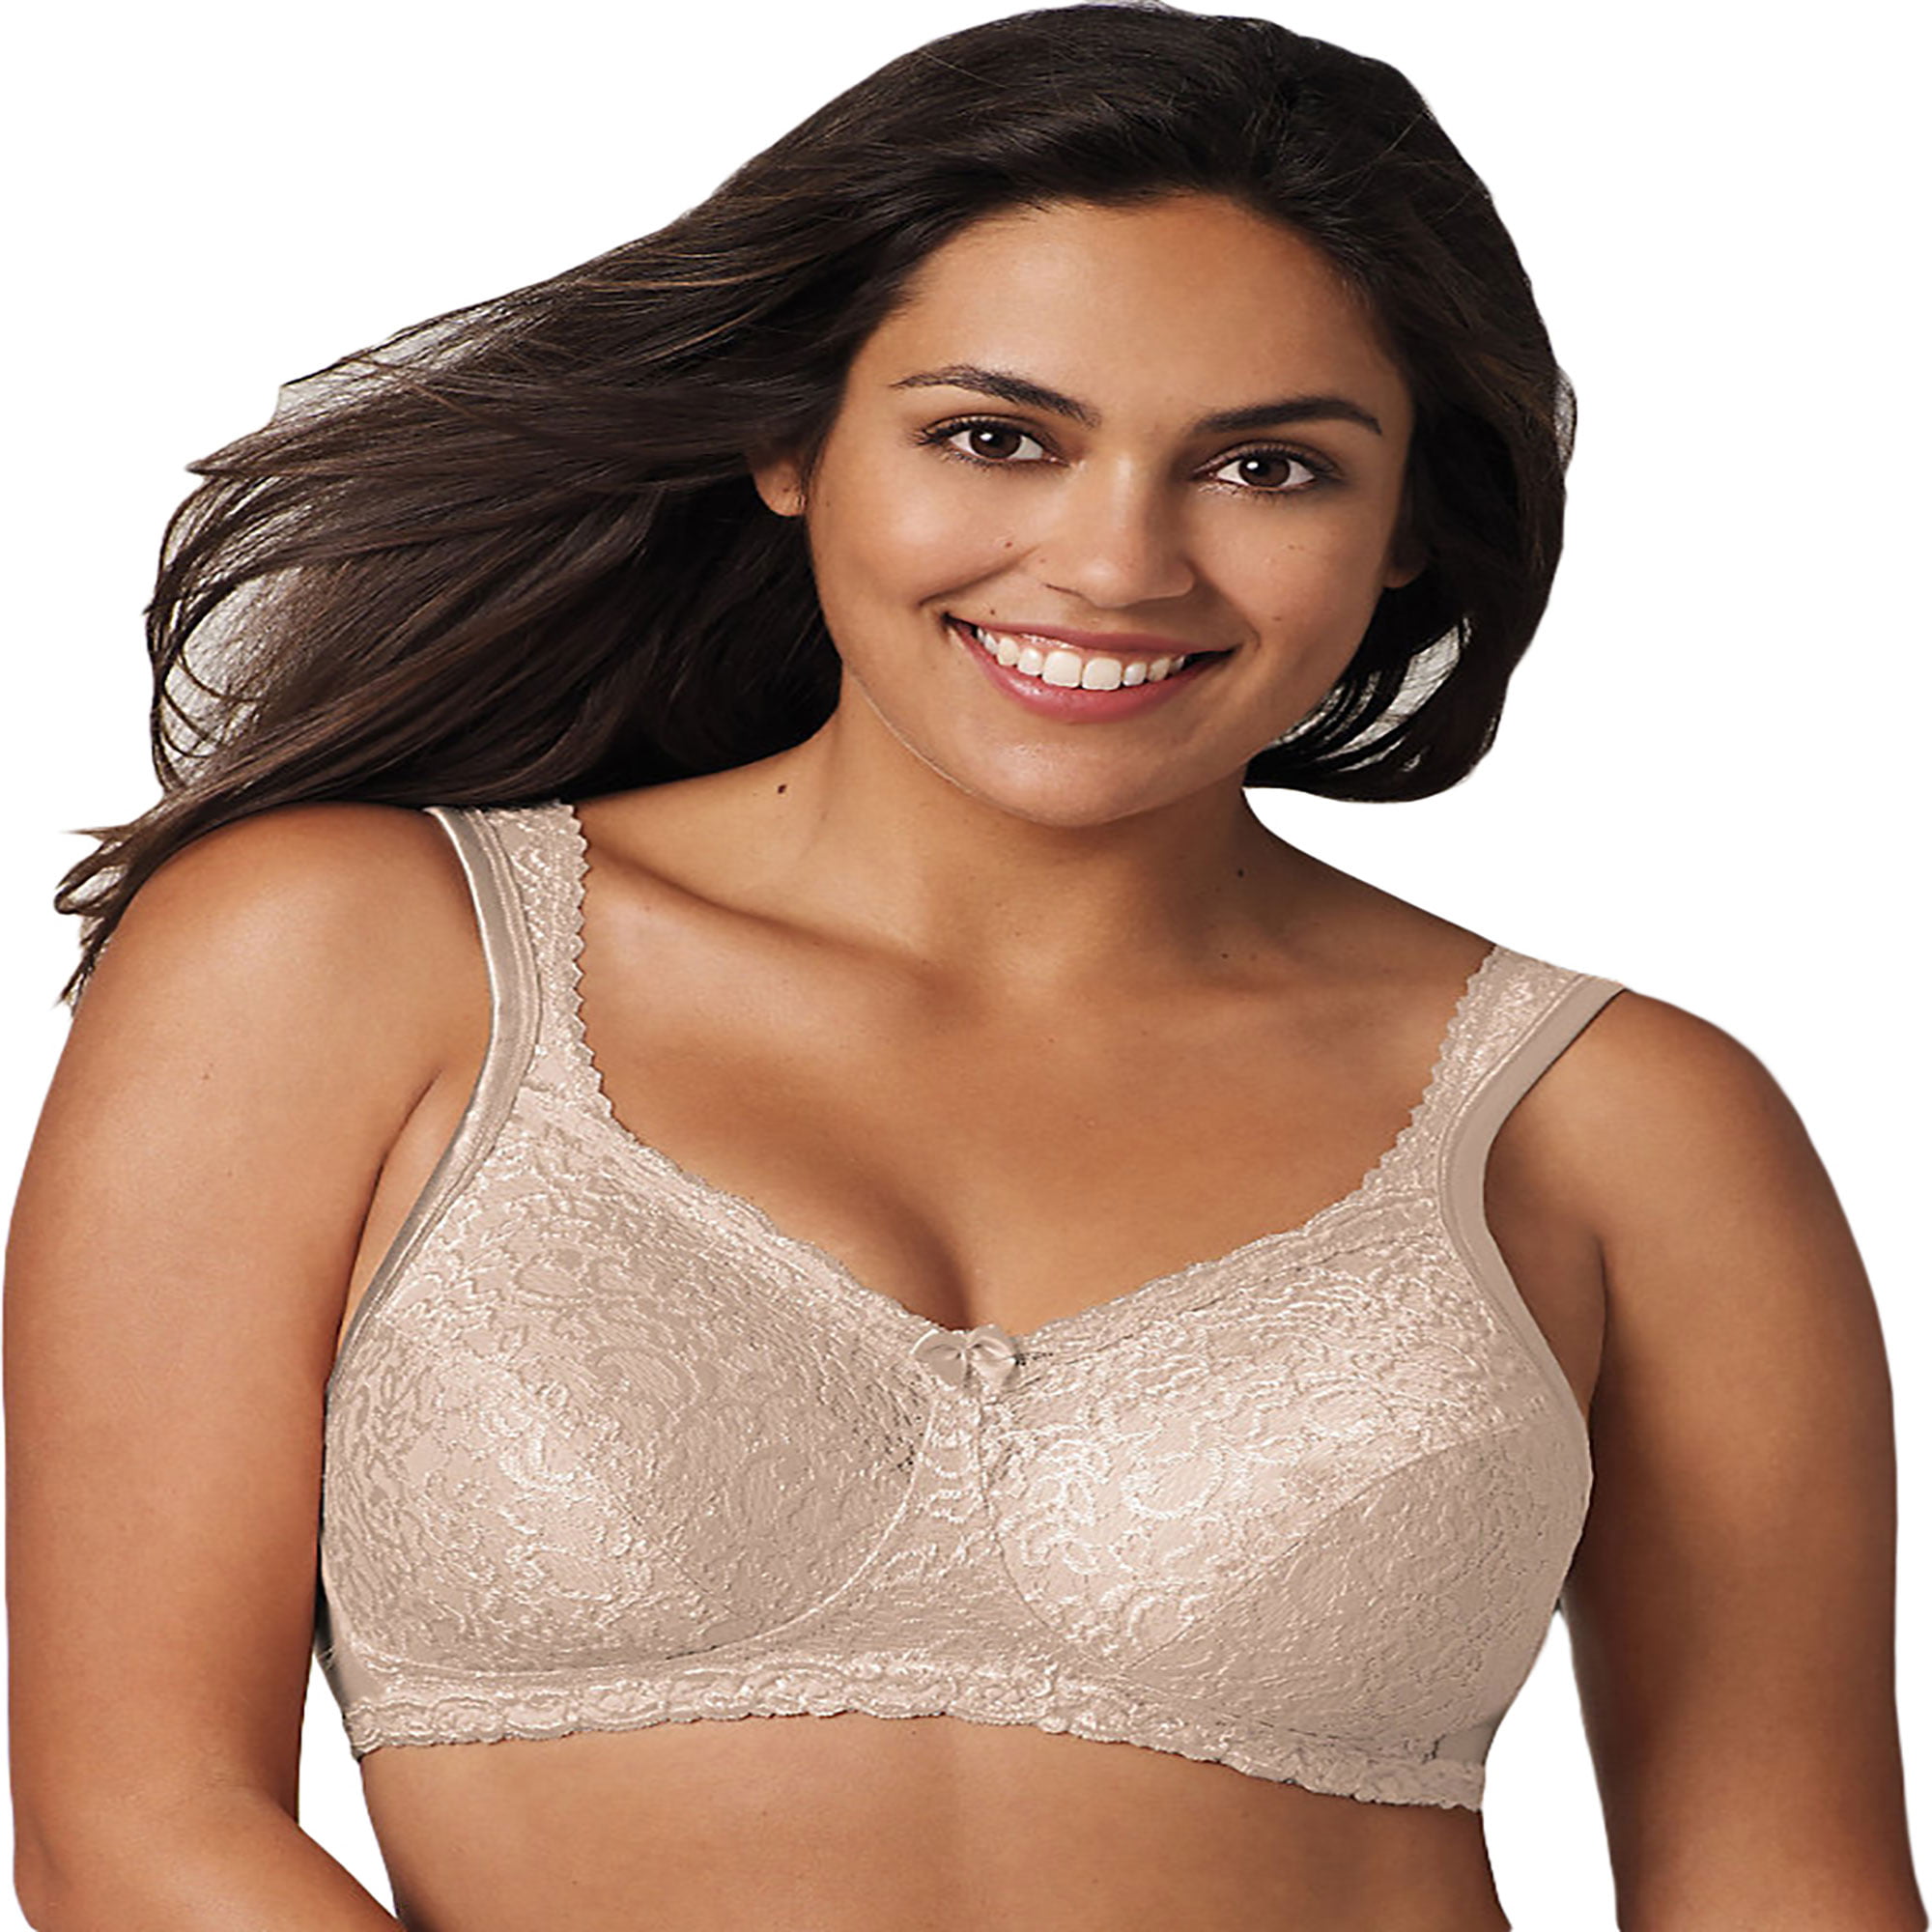 Playtex 18 Hour Wirefree Bra Active Breathable Comfort Seamless M frame Women's  4159 